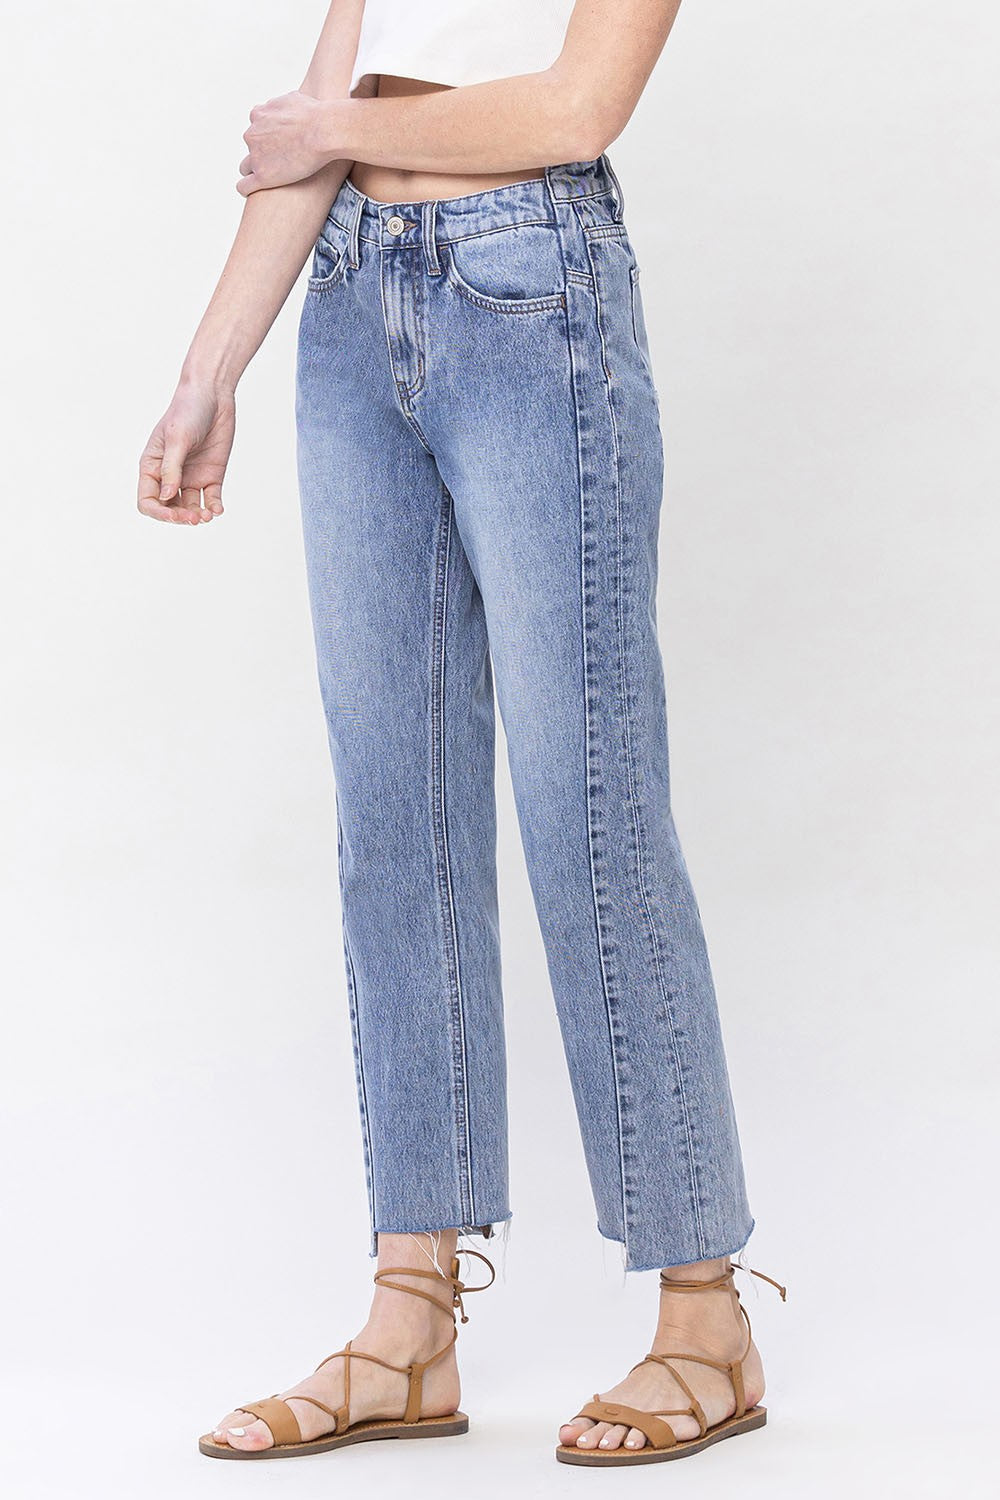 VERVET by FLYIONG MONKEY HIGH RISE RIGID STRAIGHT JEANS